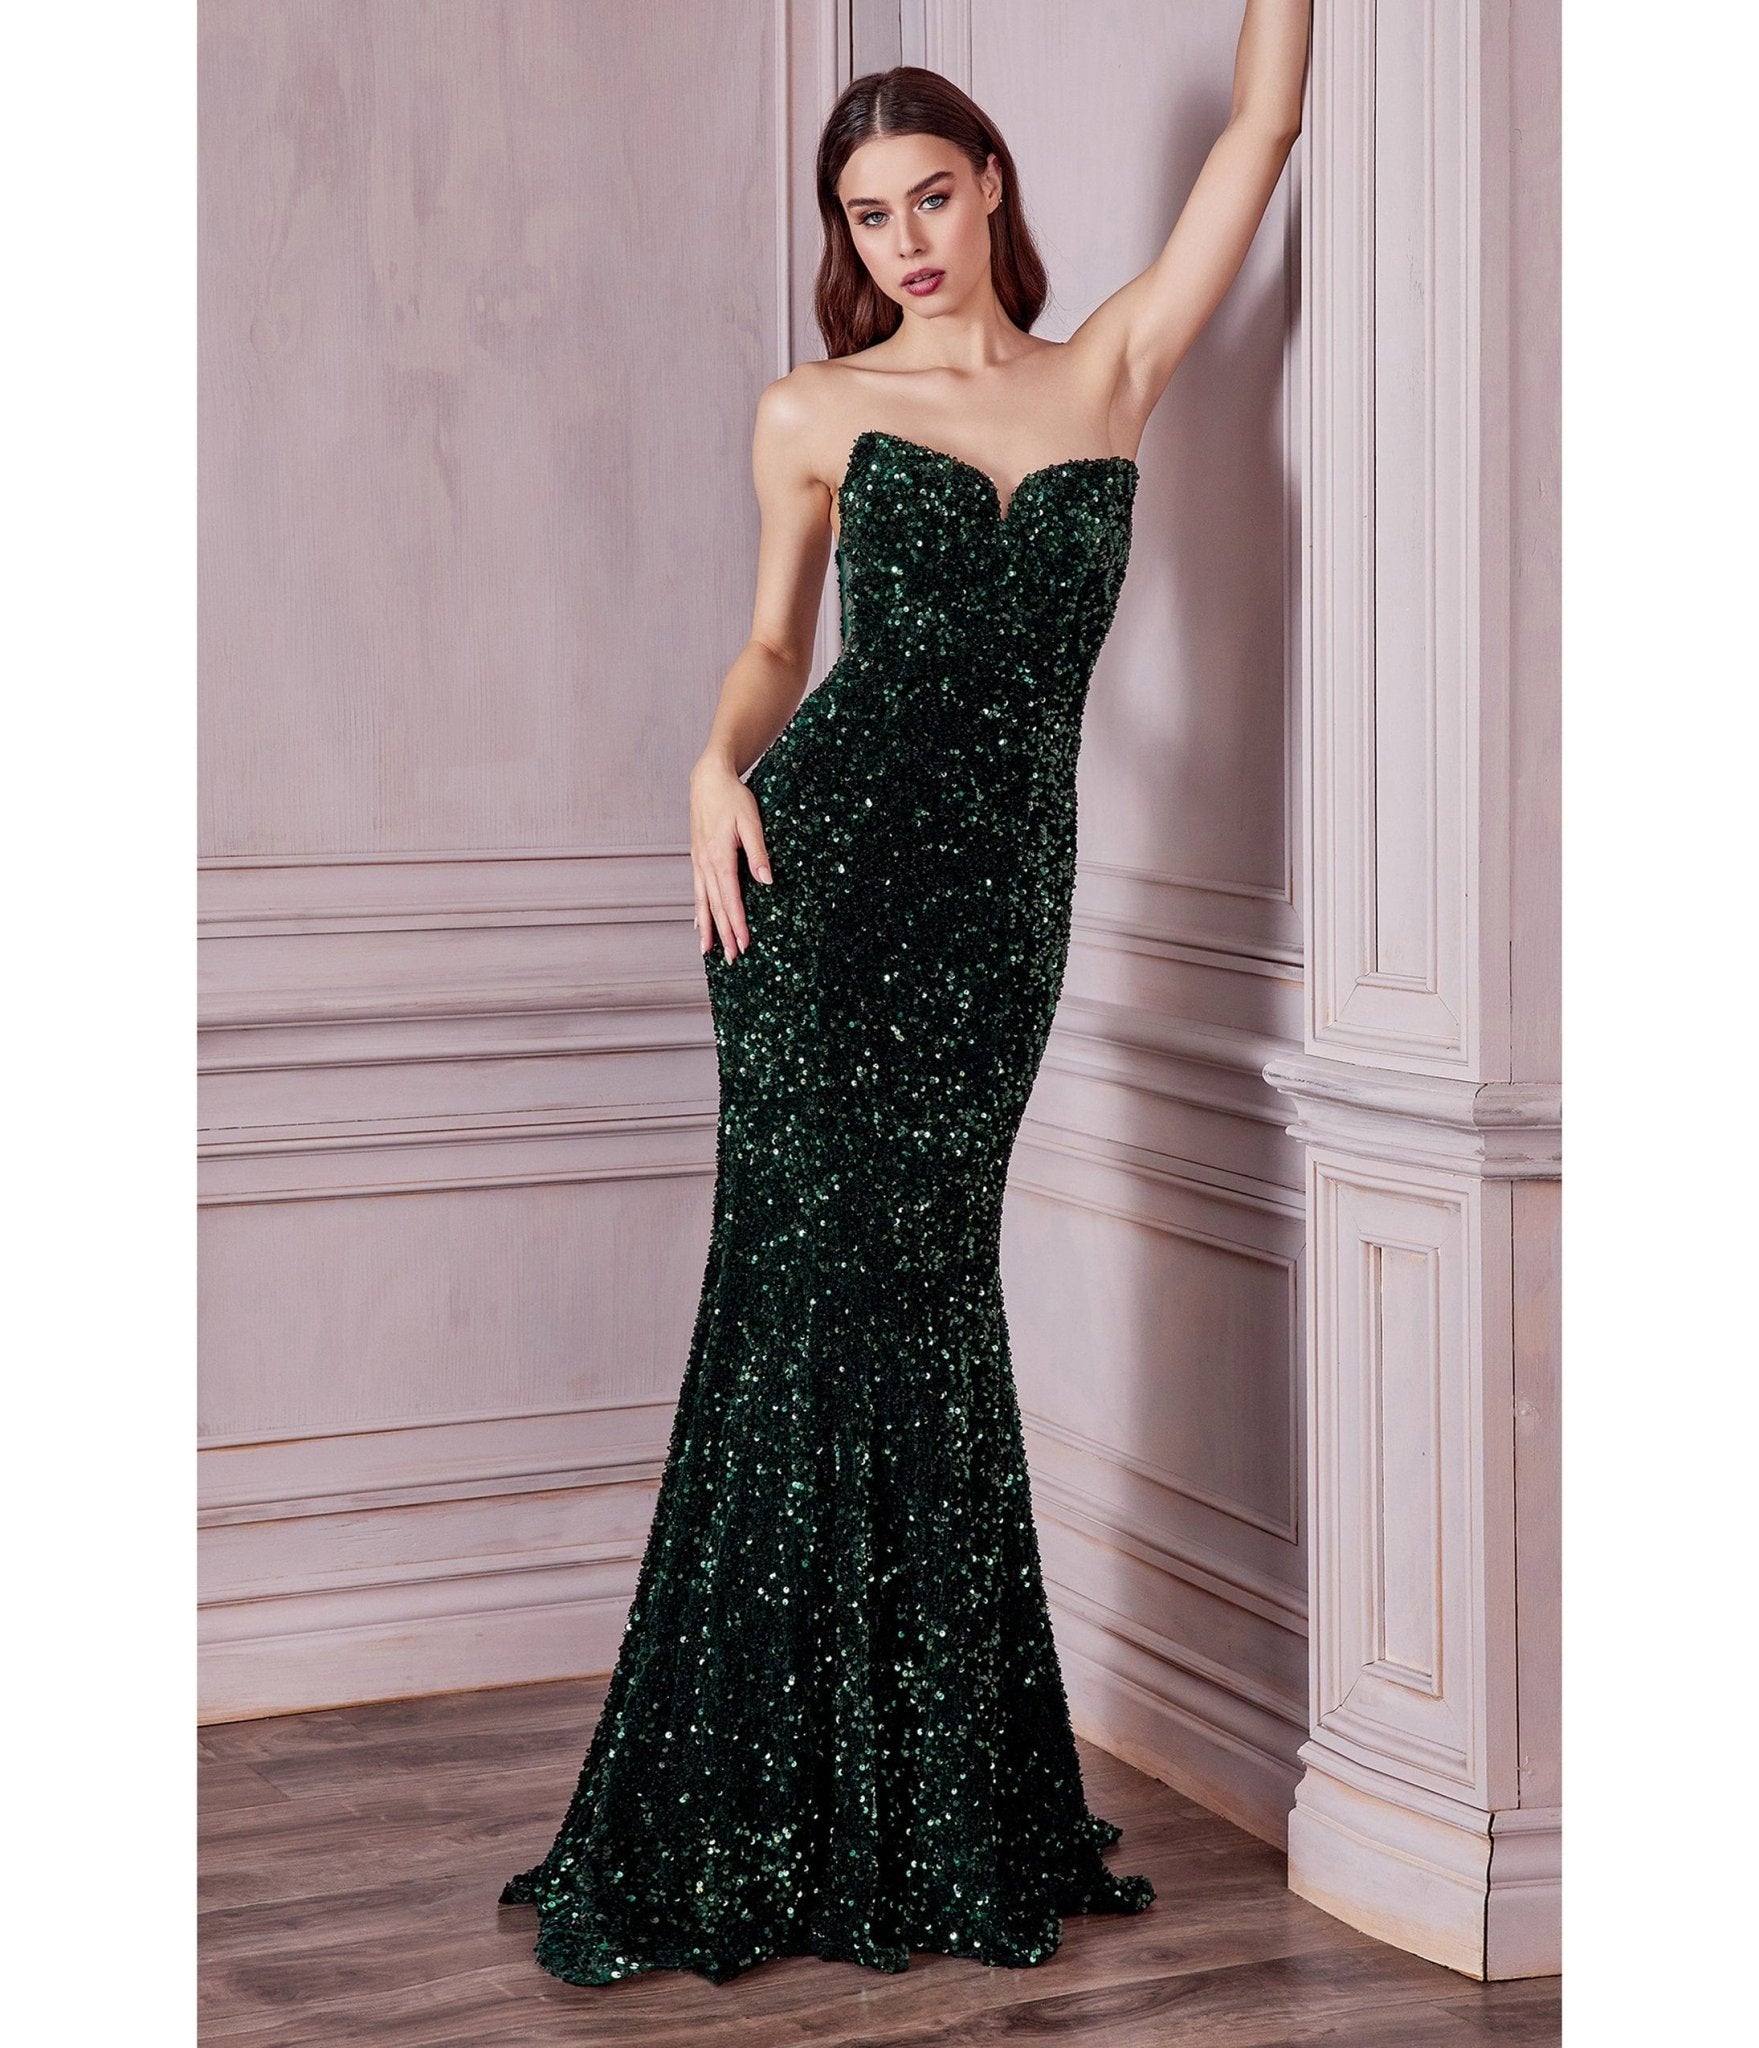 

Cinderella Divine Show Stopping Emerald Strapless Sequin Bridesmaid Gown